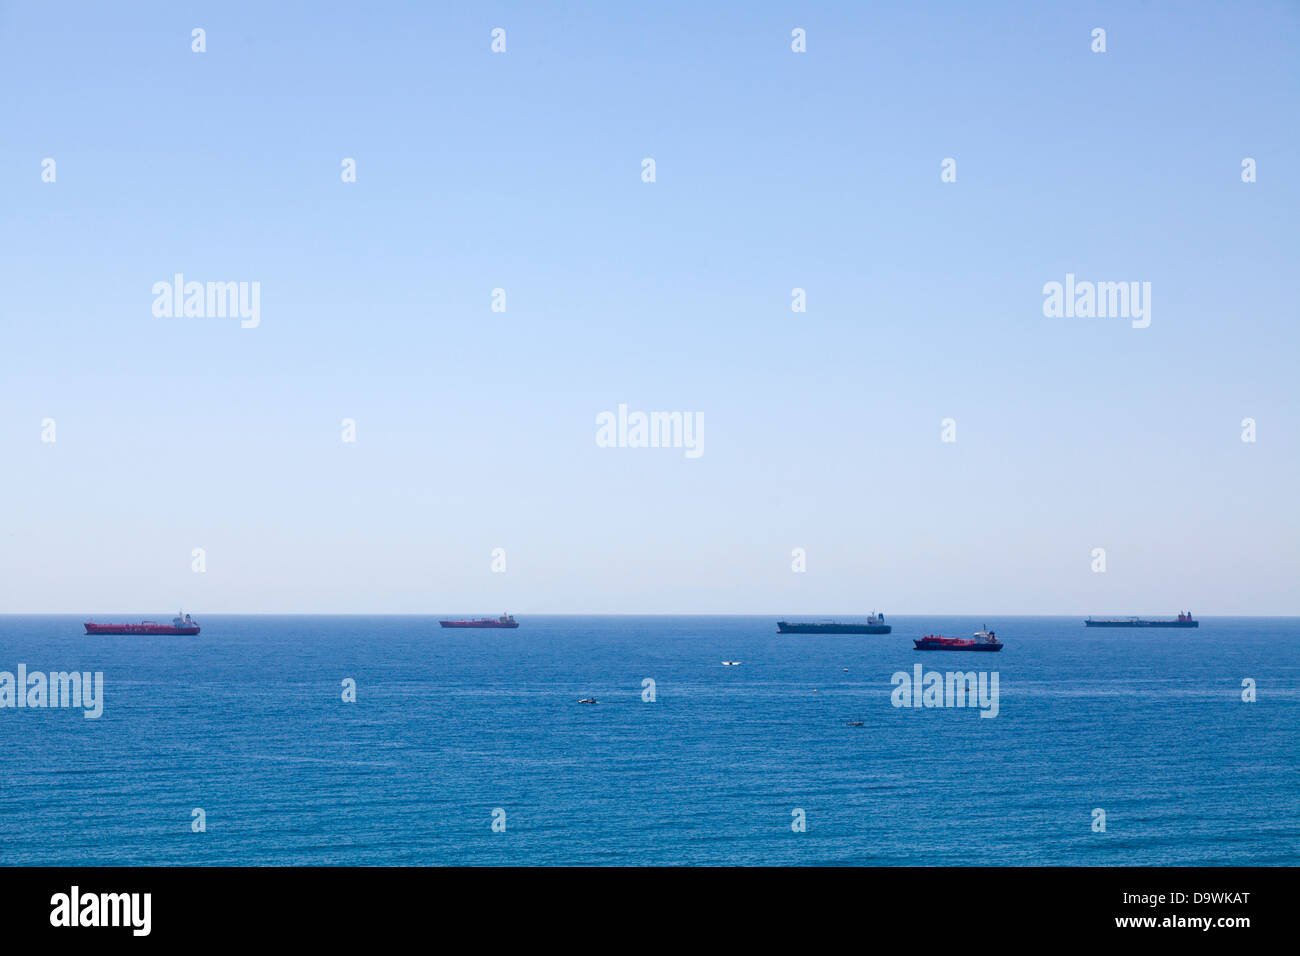 Tankers and container ships passing off Tarragona in the Mediterranean. Stock Photo